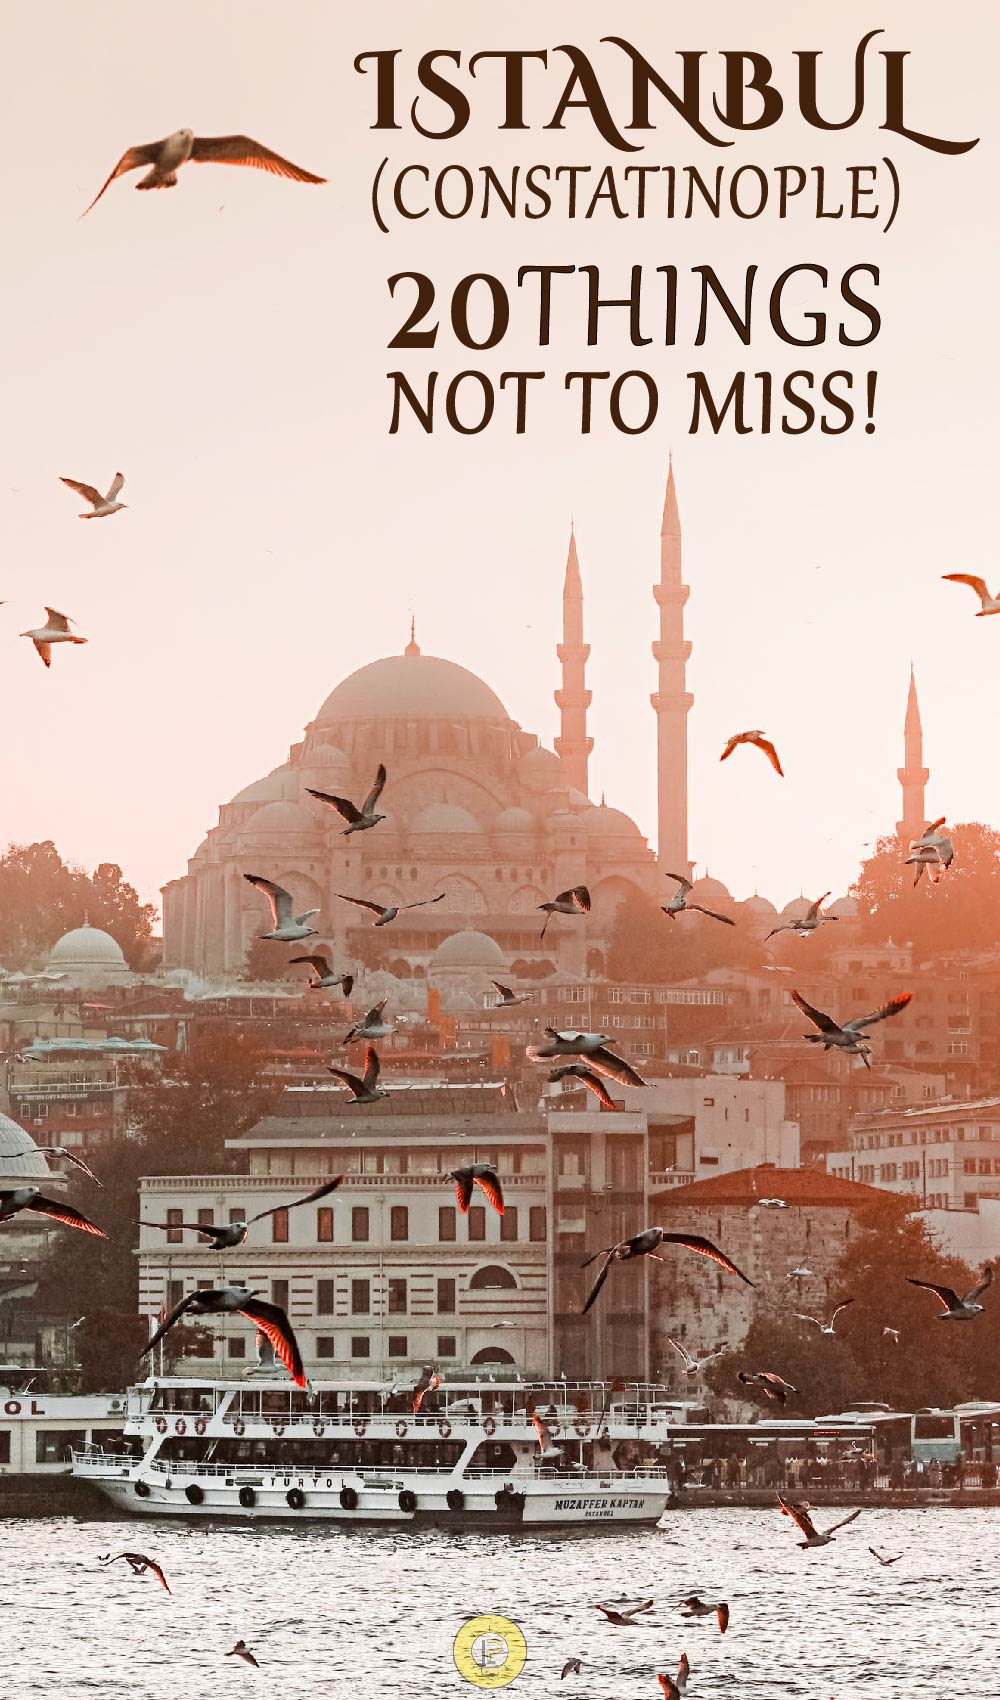 20 amazing this to do in istanbul constantinople places to visit 01